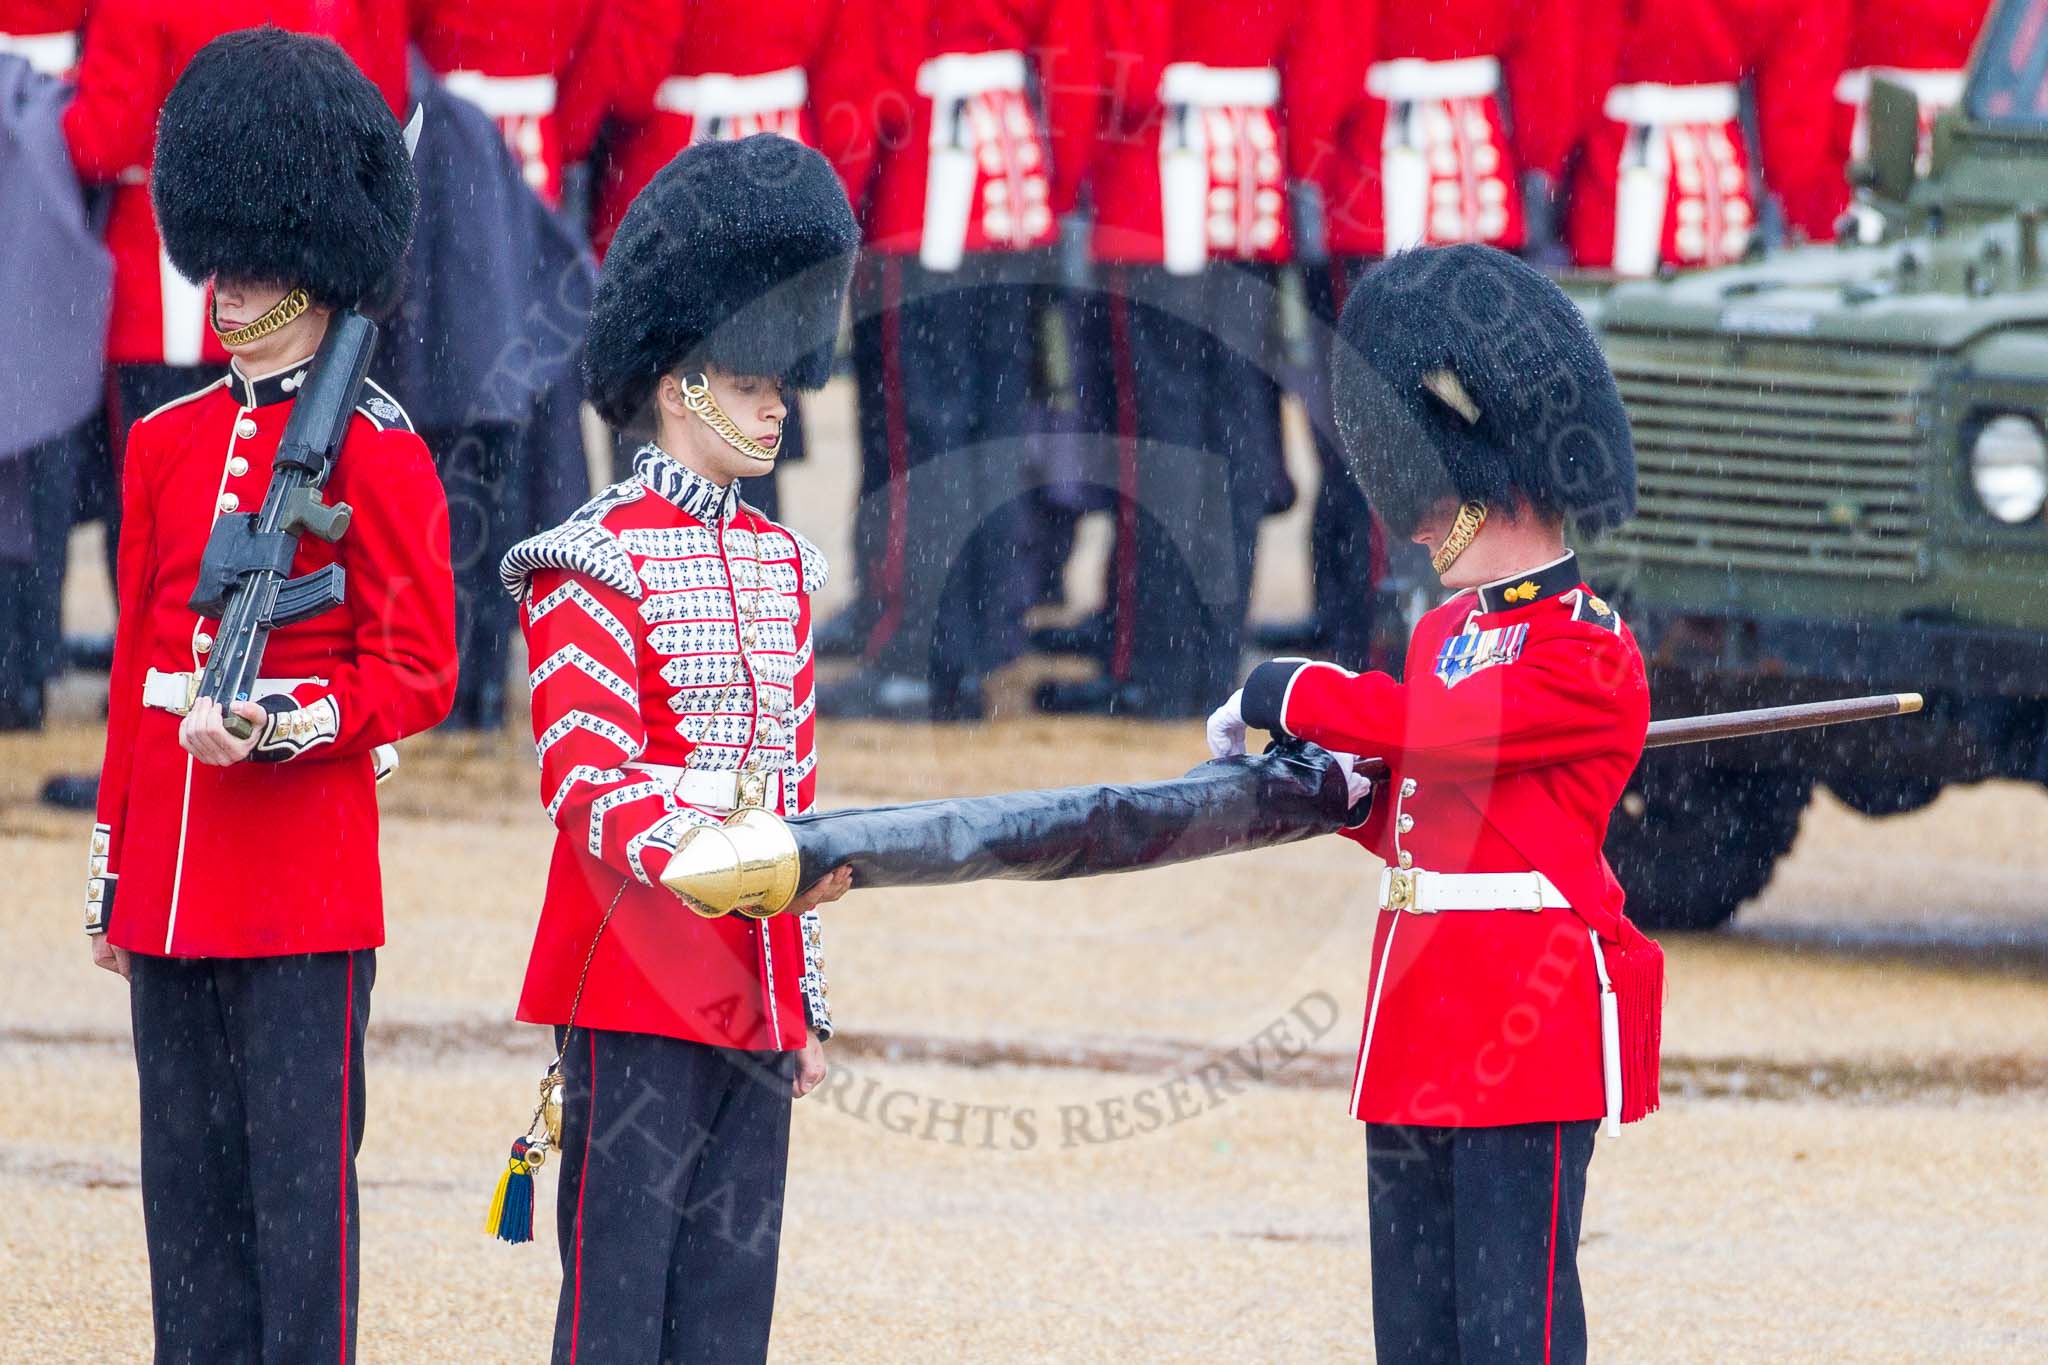 The Colonel's Review 2014.
Horse Guards Parade, Westminster,
London,

United Kingdom,
on 07 June 2014 at 10:28, image #124